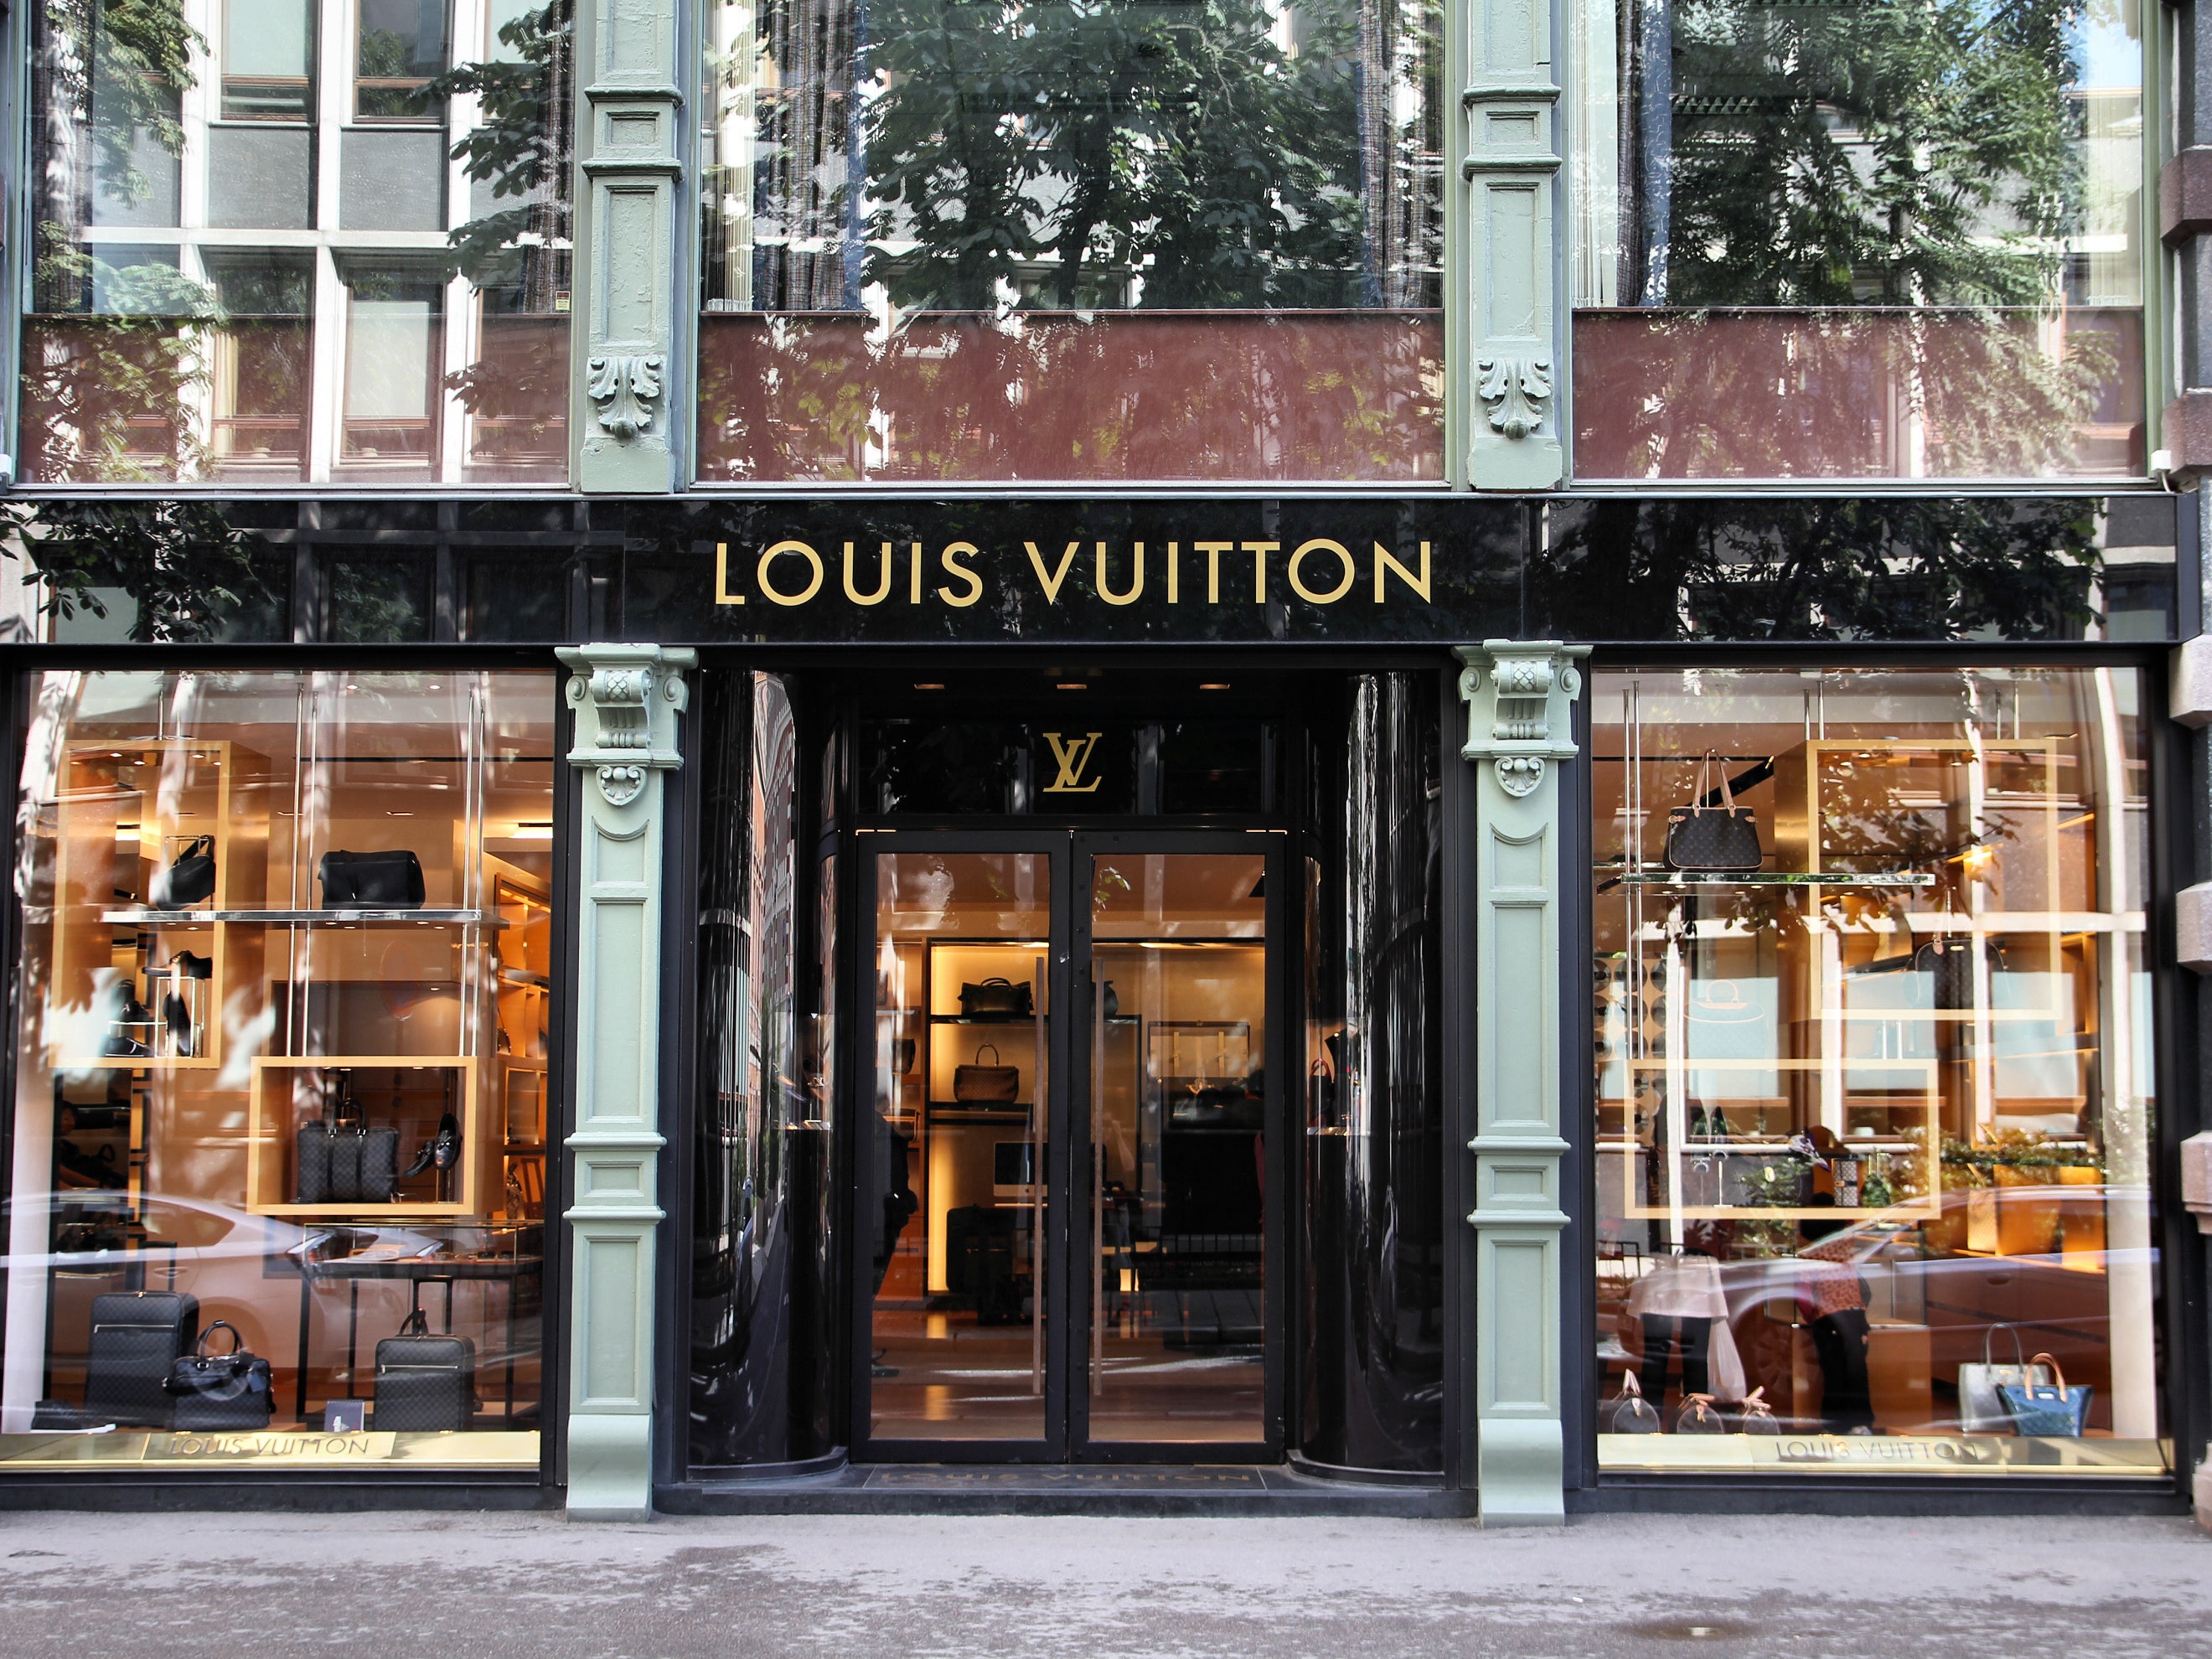 Is It Too Late To Buy Louis-Vuitton Moet-Hennessy As It Pops 7%  (OTCMKTS:LVMUY)